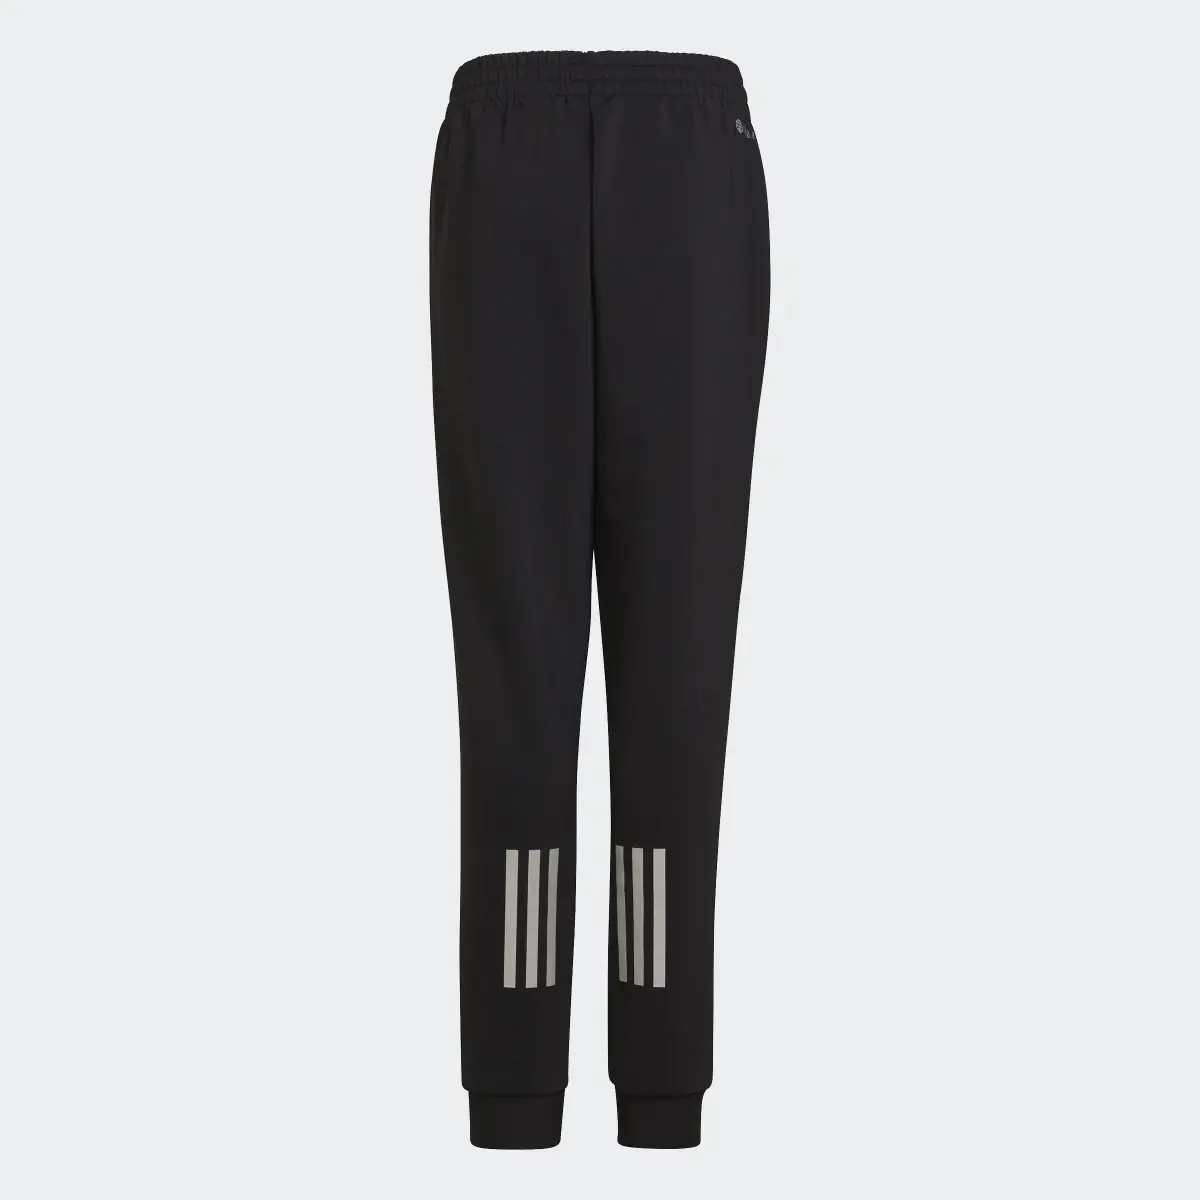 Adidas COLD.RDY Sport Icons Training Pants. 2